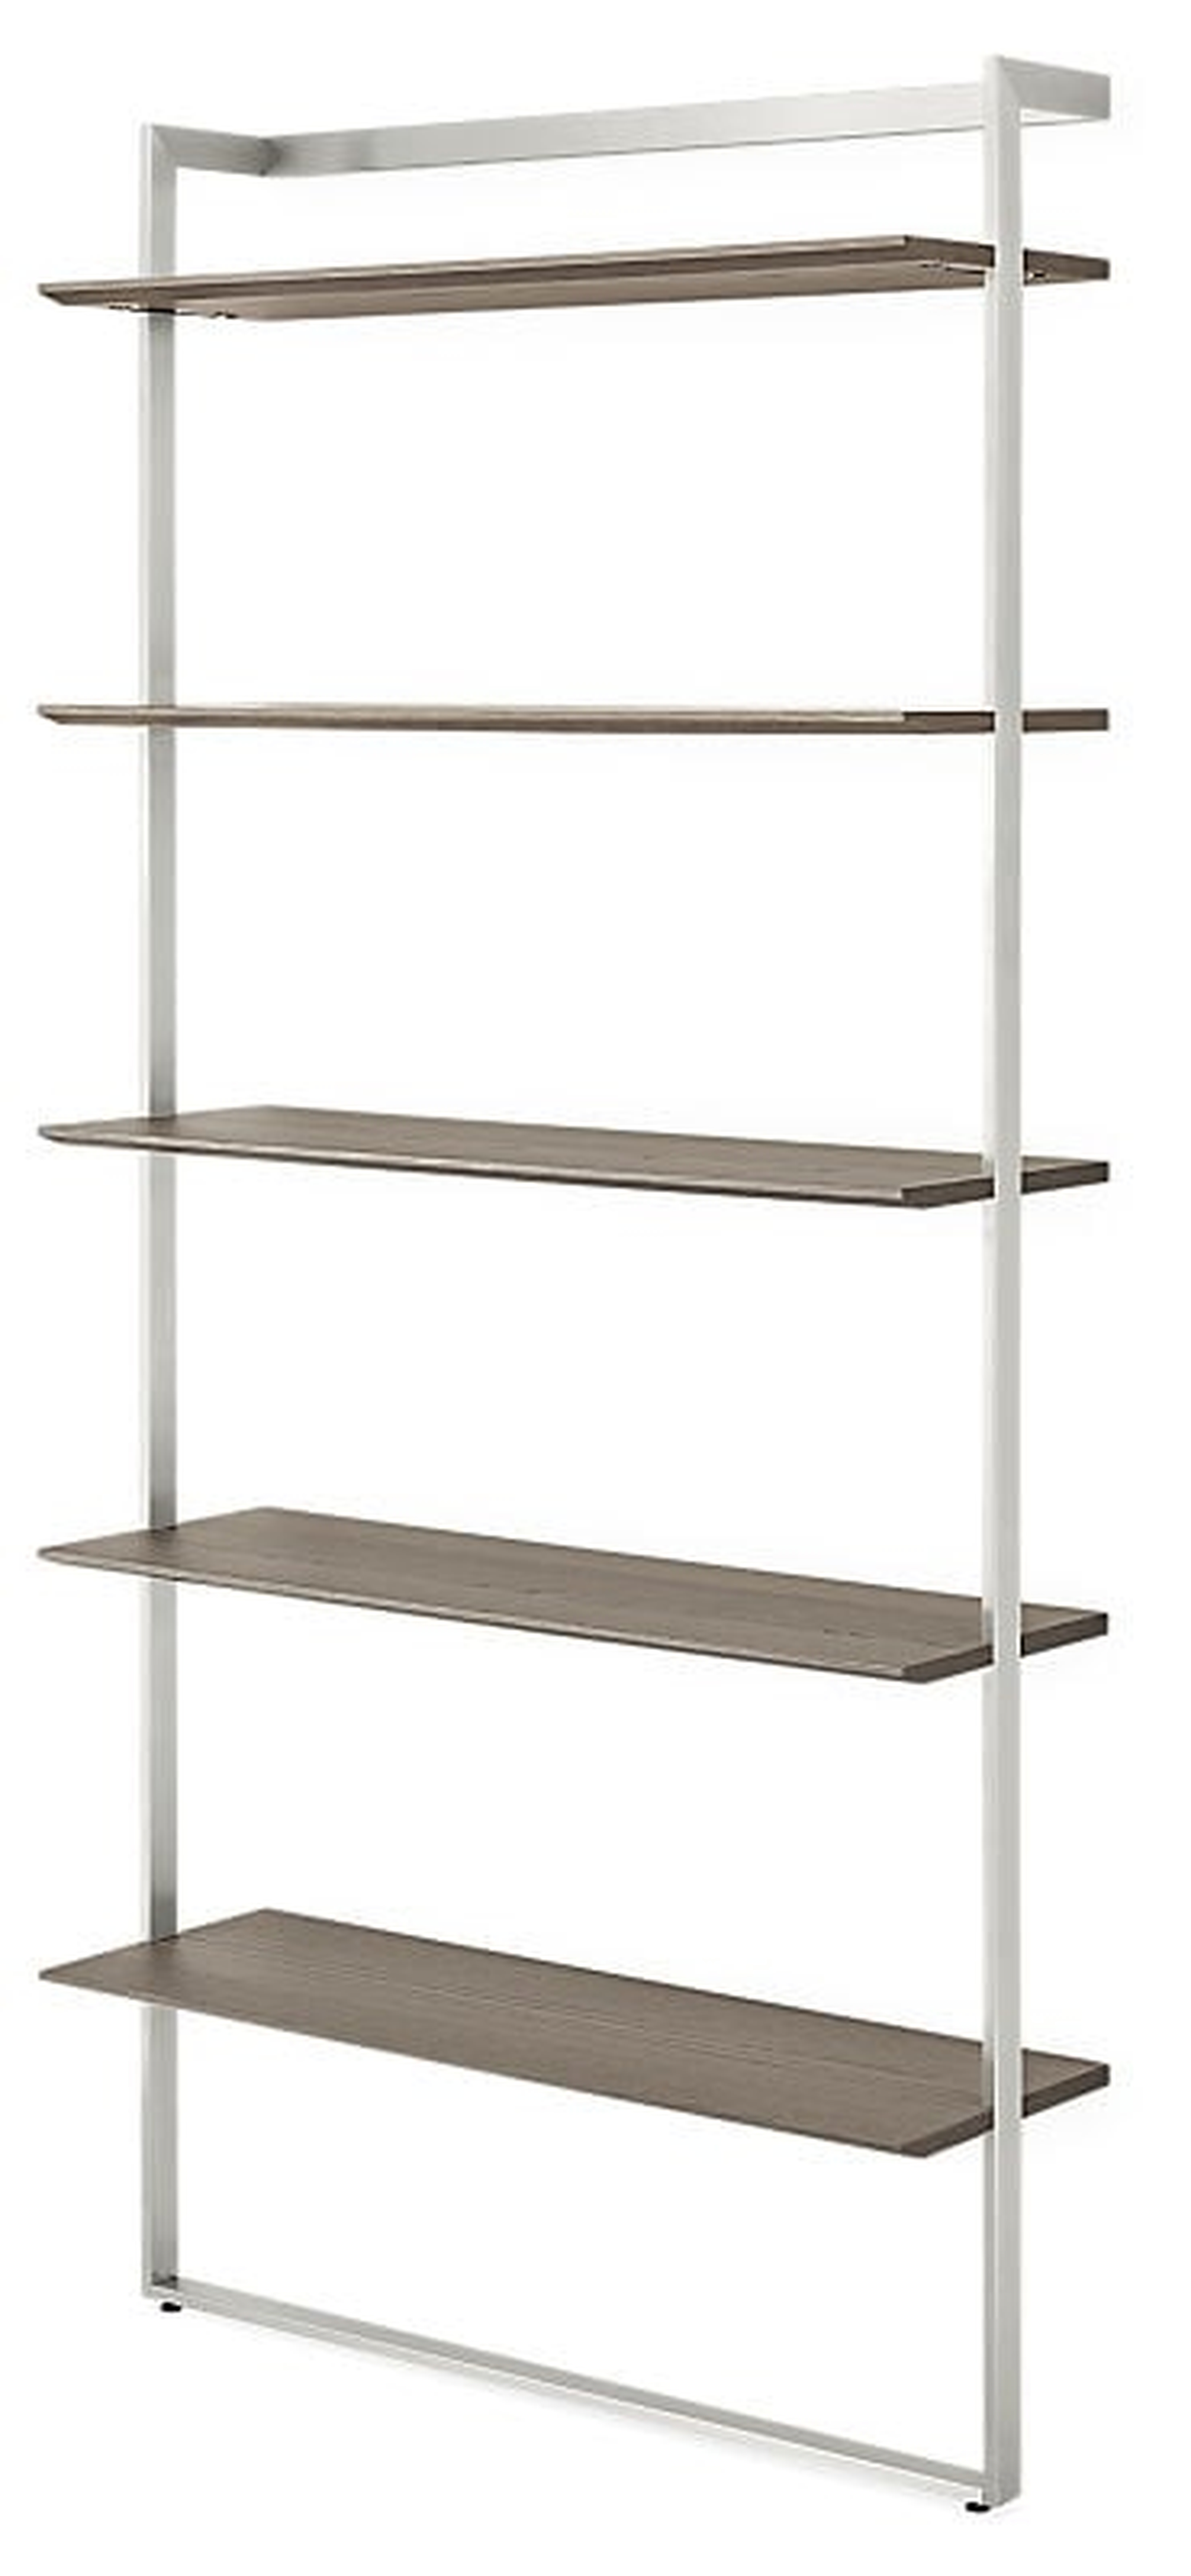 Beam Bookcase, Ash & Stainless Steel - Room & Board